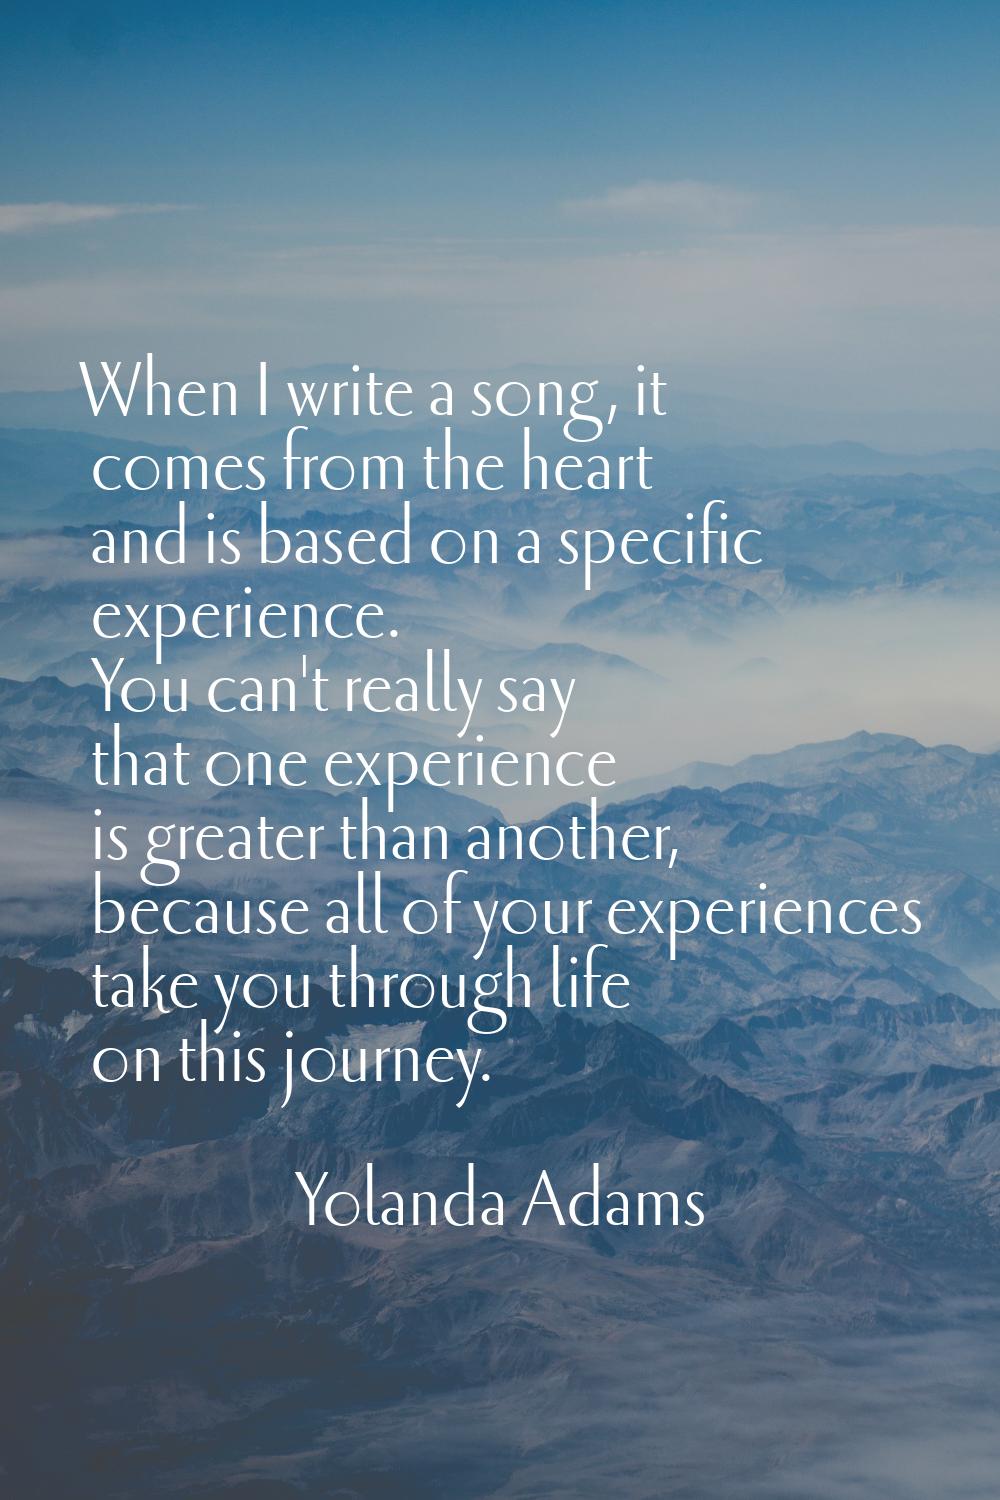 When I write a song, it comes from the heart and is based on a specific experience. You can't reall